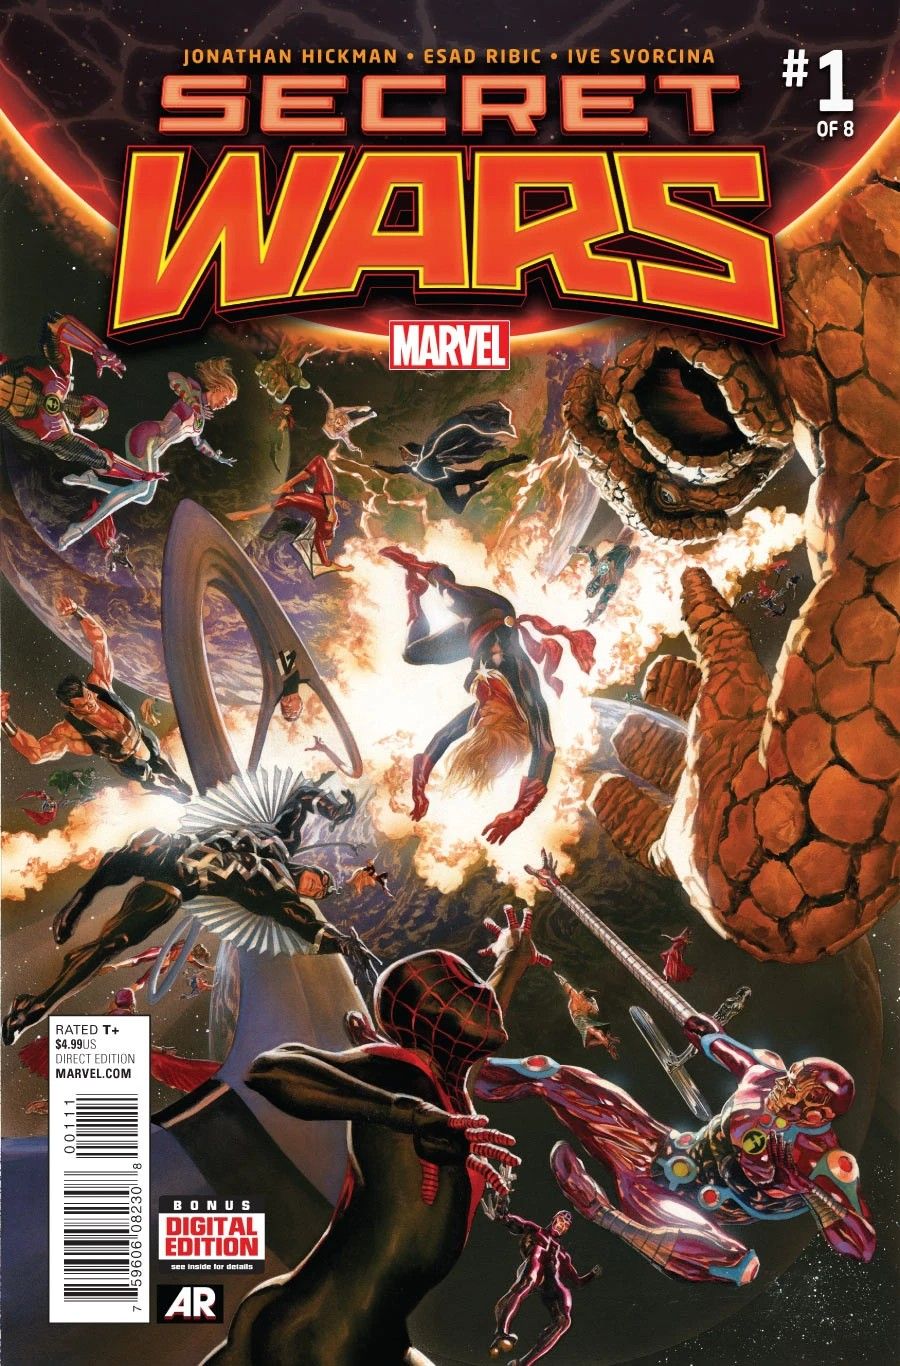 The Avengers, Fantastic Four, X-Men, and more fight for their lives in Secret Wars (2015) #1 by Marvel Comics